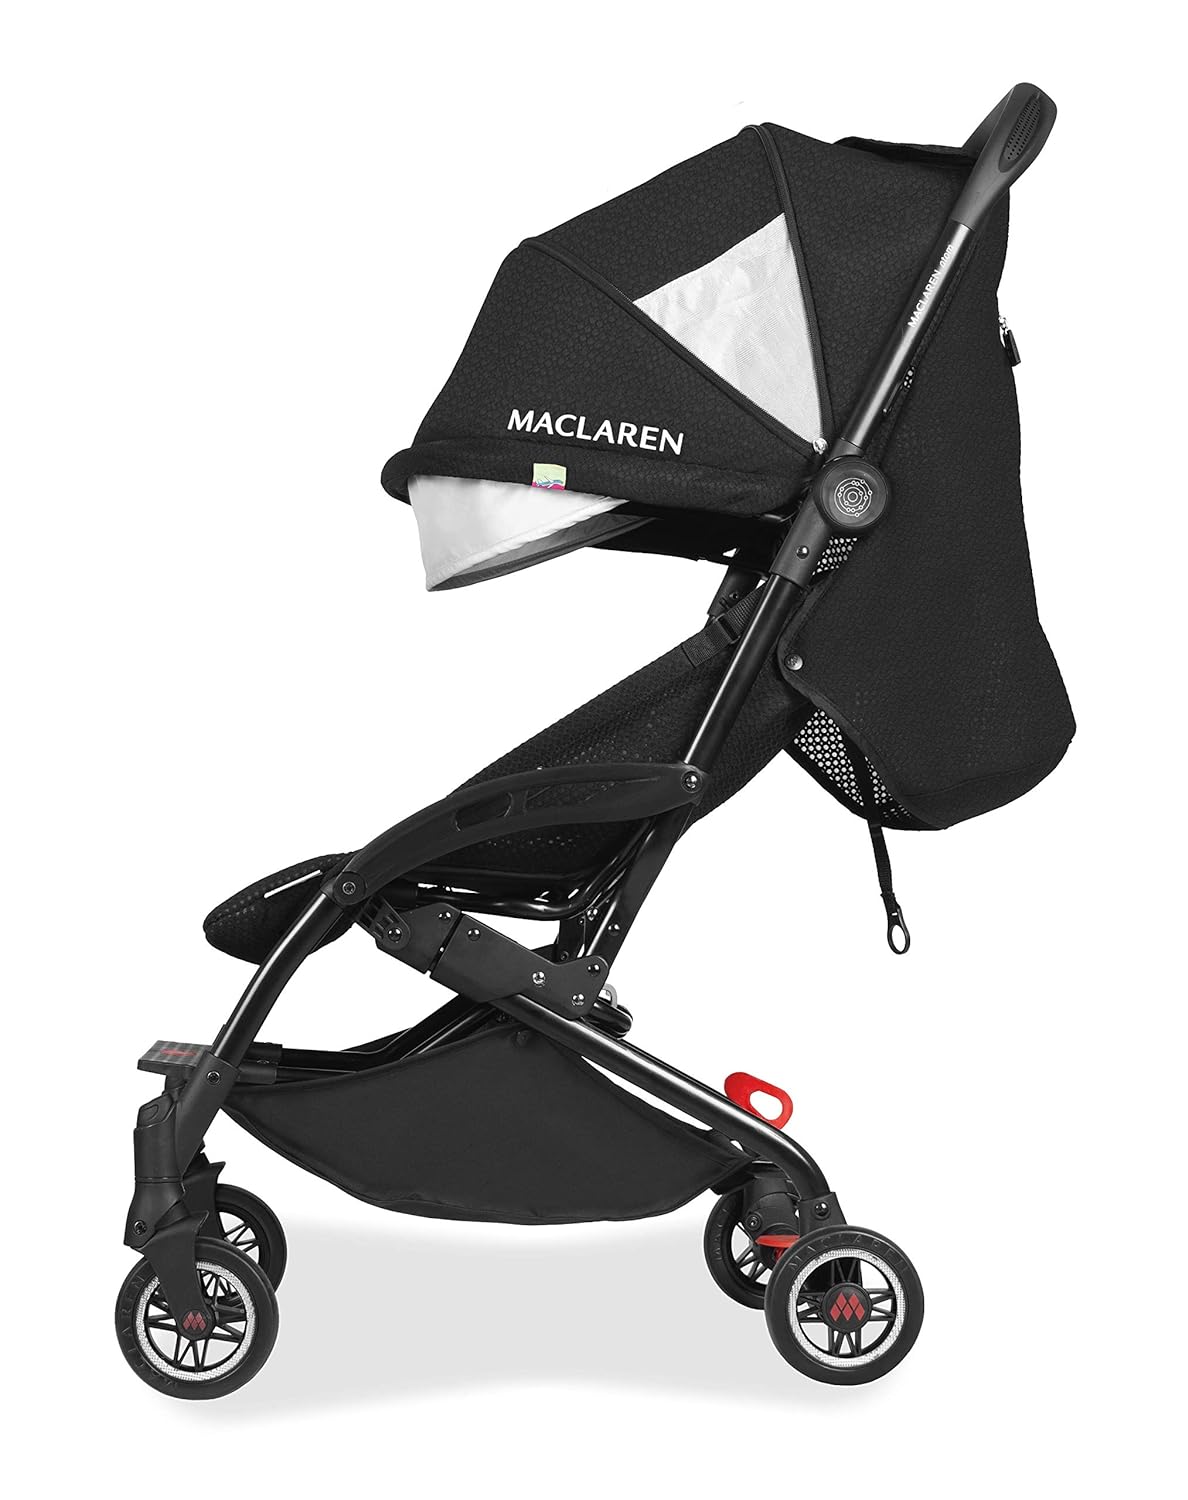 Maclaren Atom Style Set Travel System- Super Lightweight, Ultra-Compact Stroller, Fits On Airplane's Overhead Storage. Car Seat Compatible. Loaded with Accessories. Multi-Position Reclining Seat - image 4 of 6